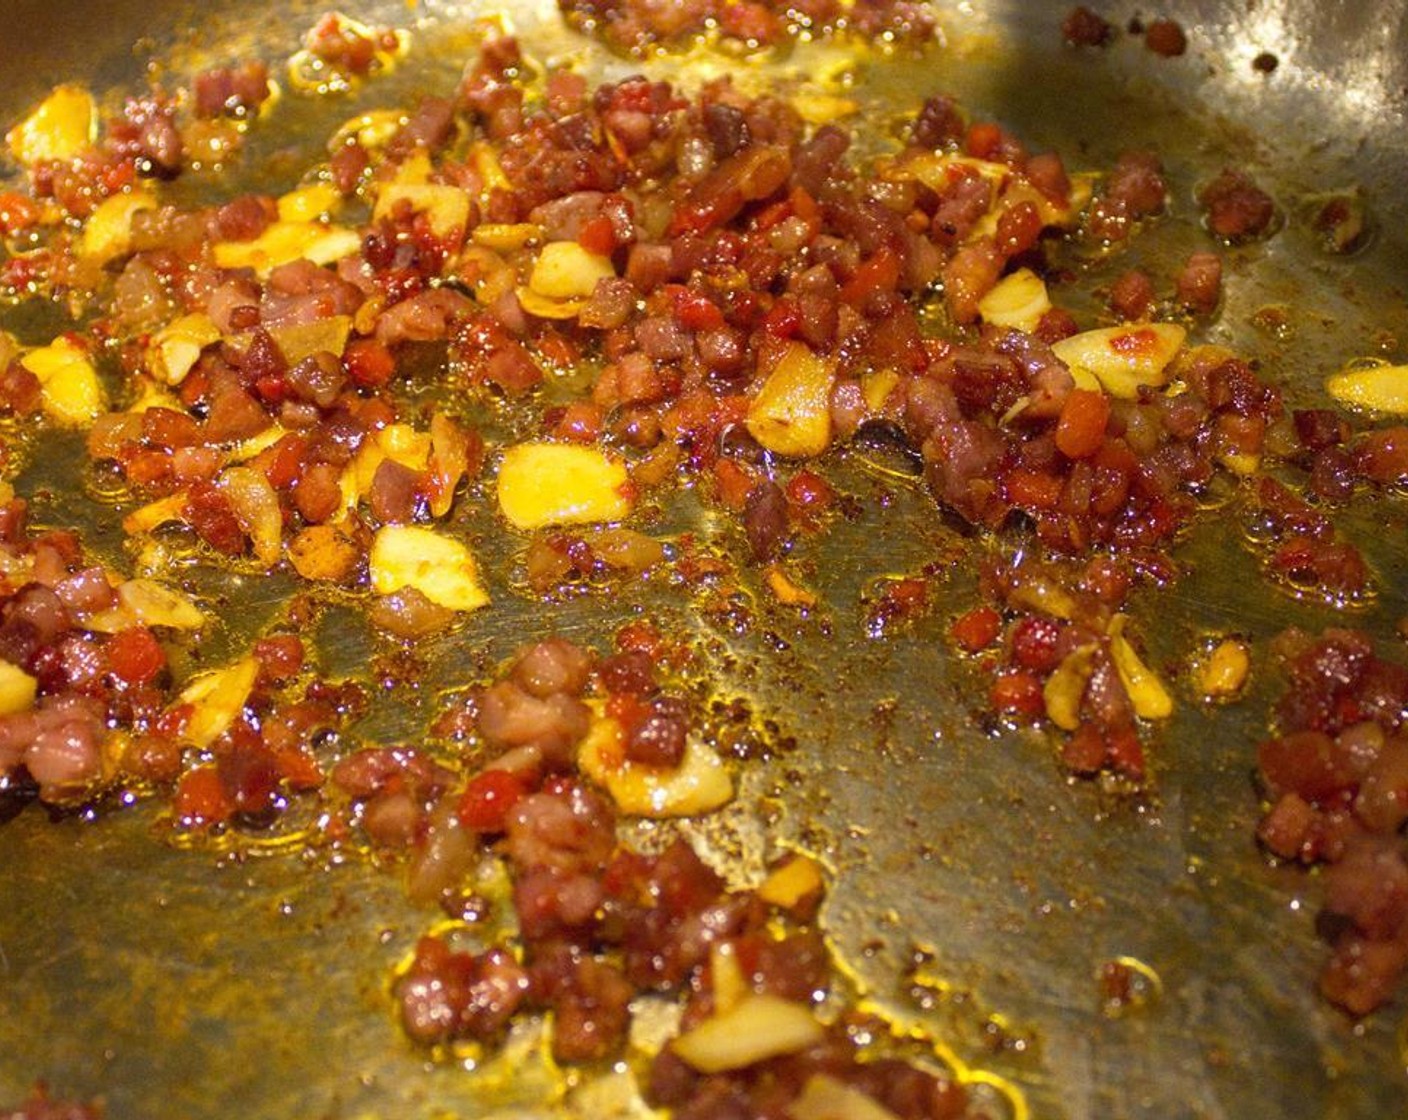 step 3 While that's cooking, heat a large skillet to medium-high with Olive Oil (as needed) to coat. Add the Pancetta (1/2 cup)  and cook until just starting to crisp. Add the pimientos and garlic and cook for 1-2 minutes.